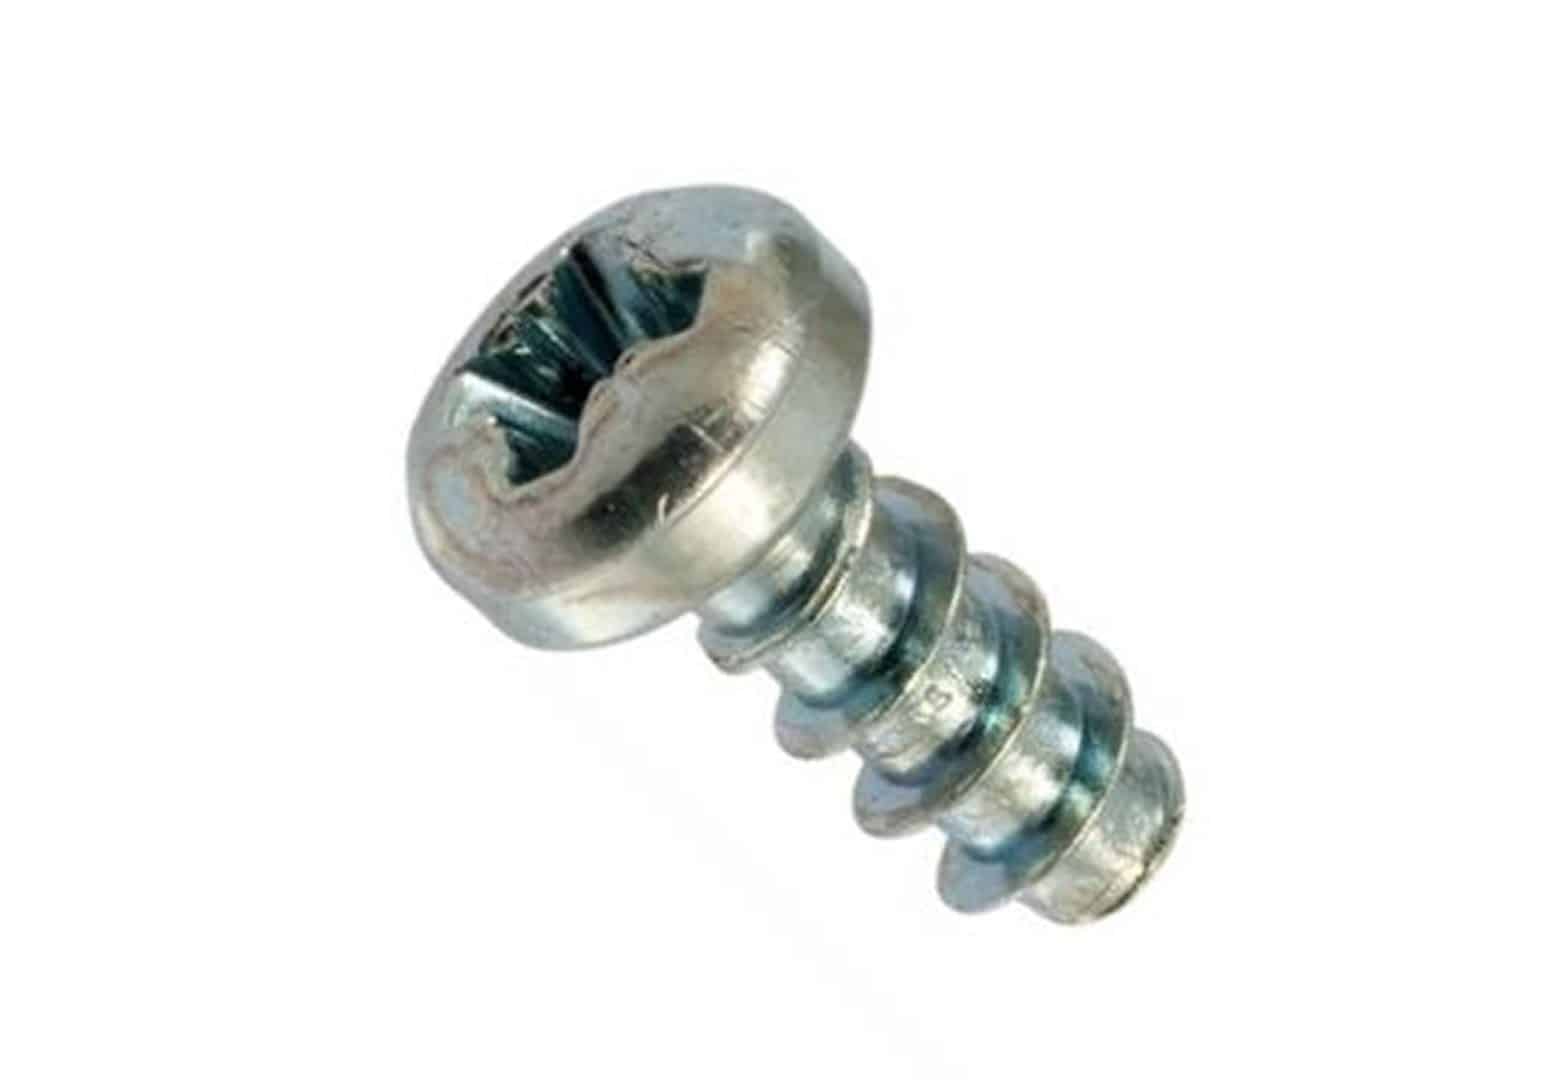 cross-recess-thread-forming-screws-for-plastic-a2-stainless-steel